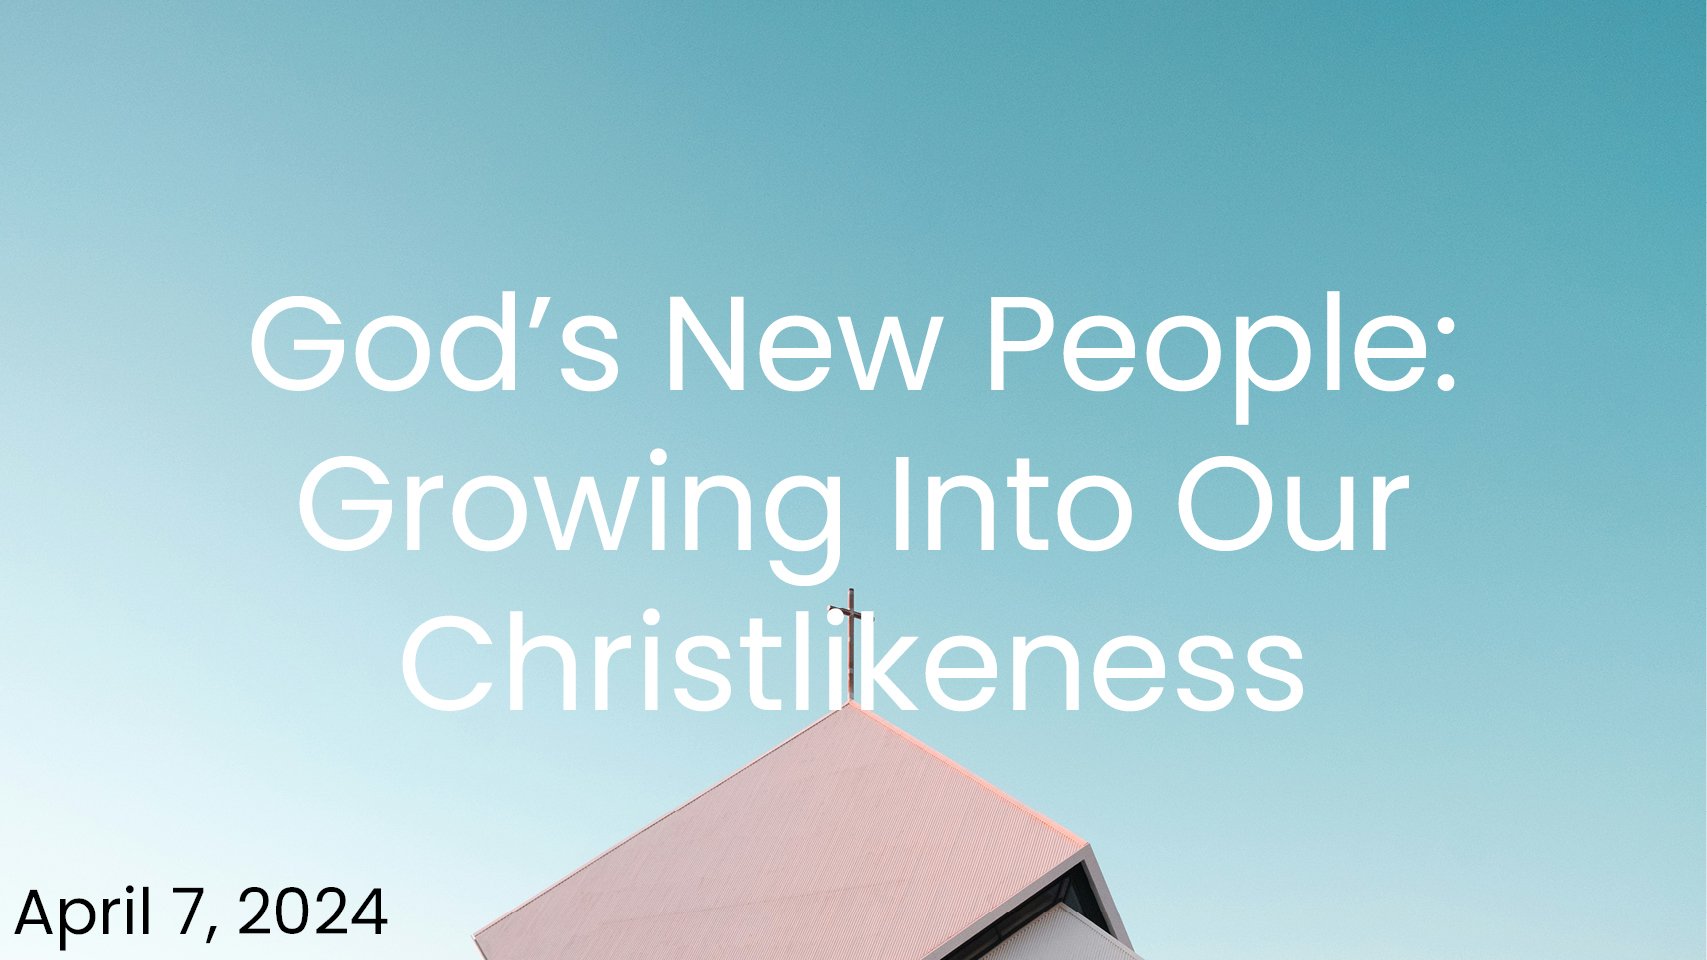 God's New People: Growing Into Our Christlikeness